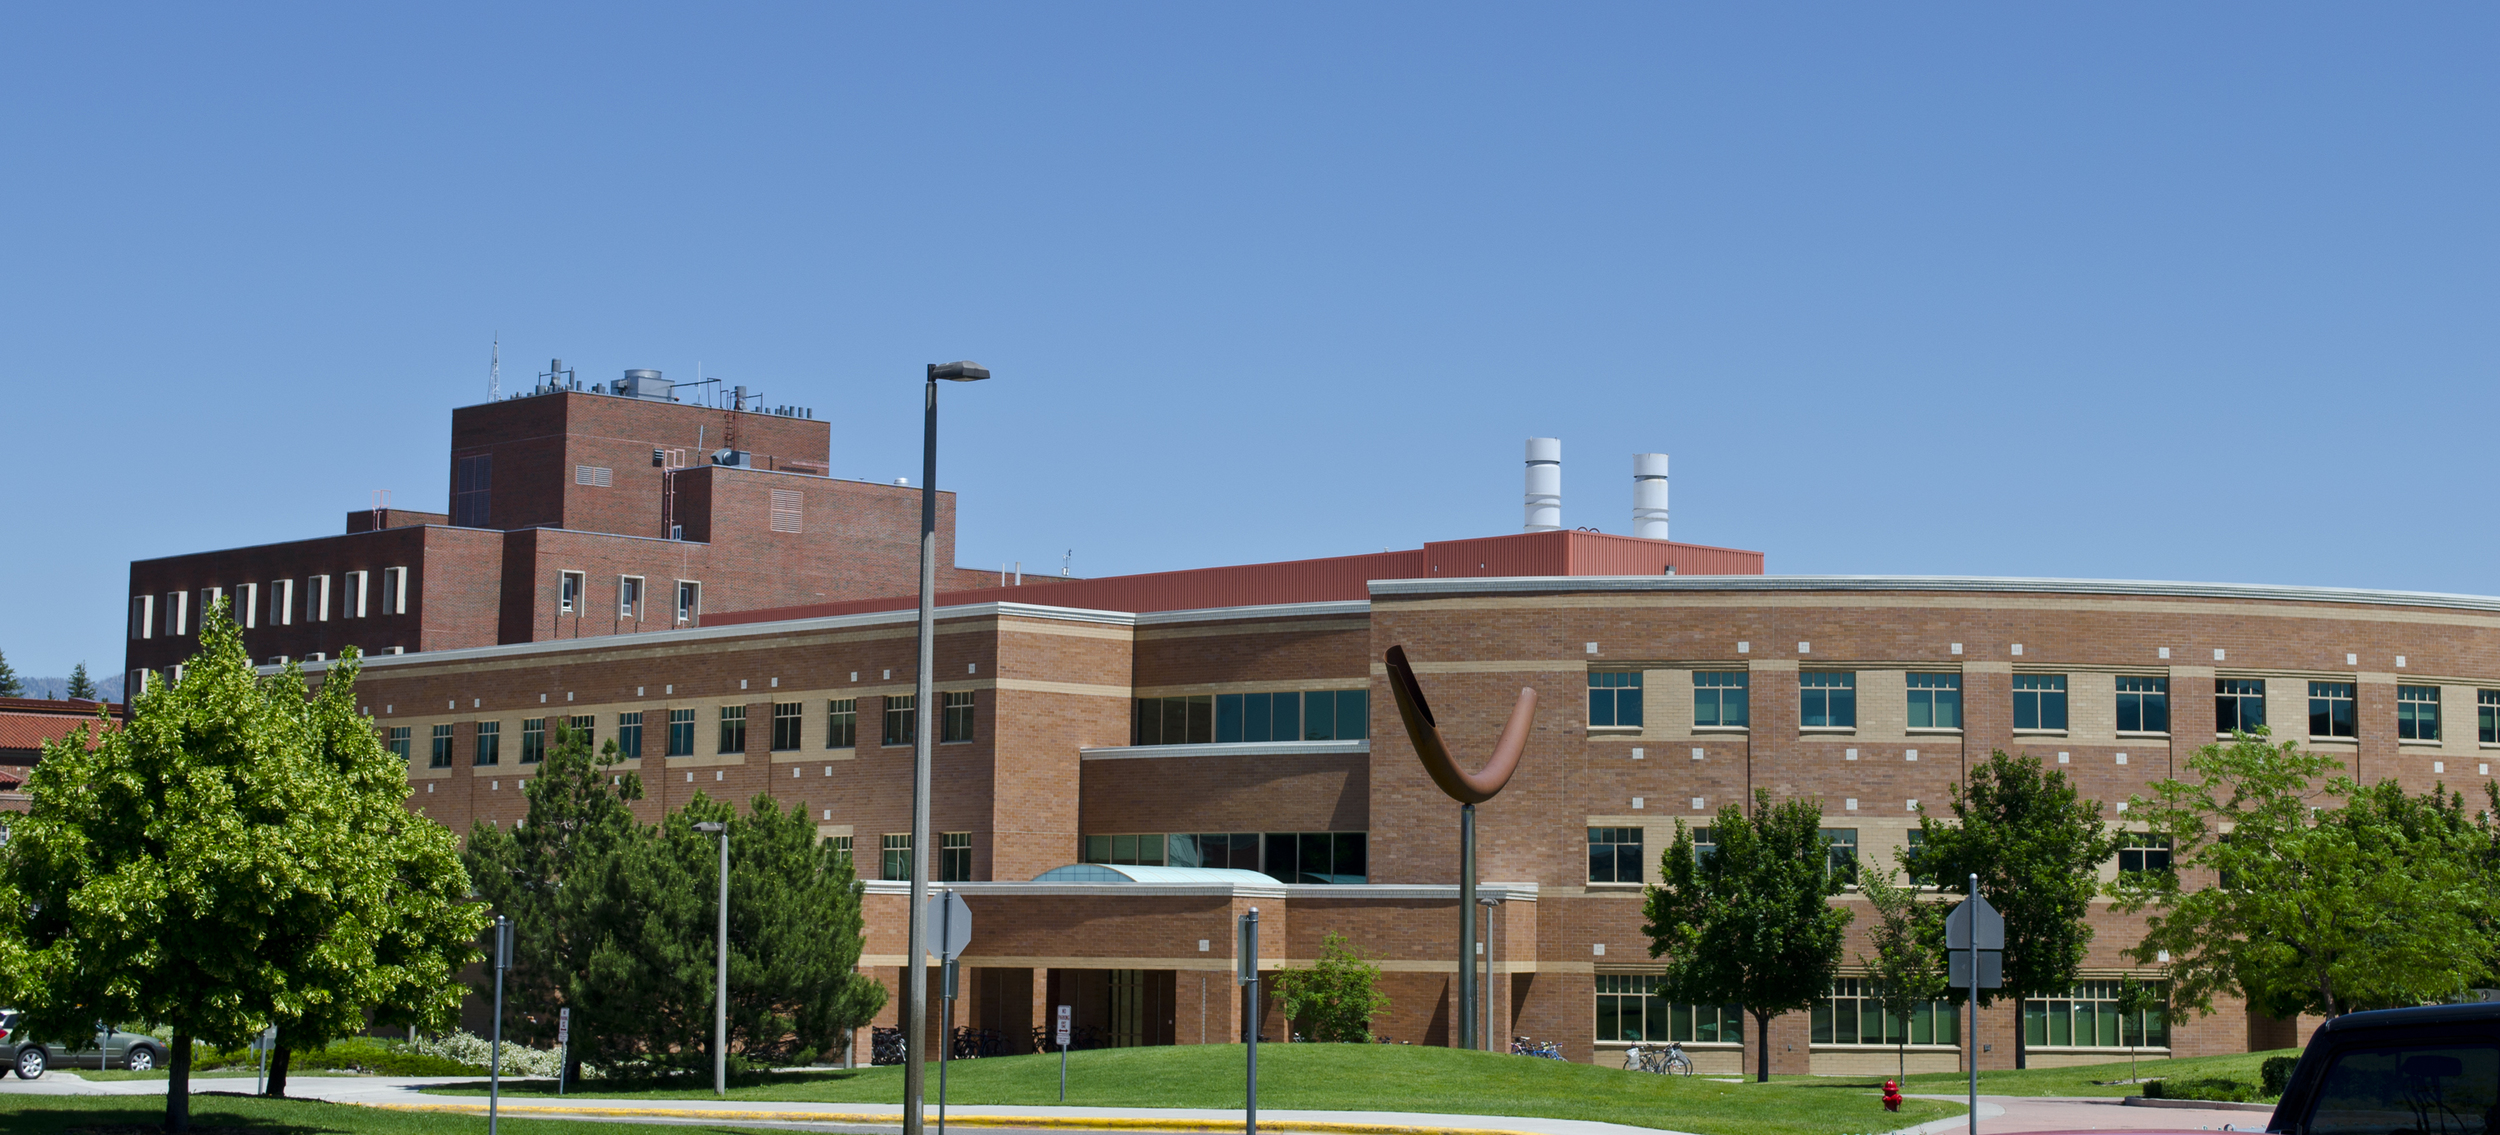 Looking_NE_Engineering_and_Physical_Sciences_Building_-_Montana_State_University_-_2013-07-09.jpg